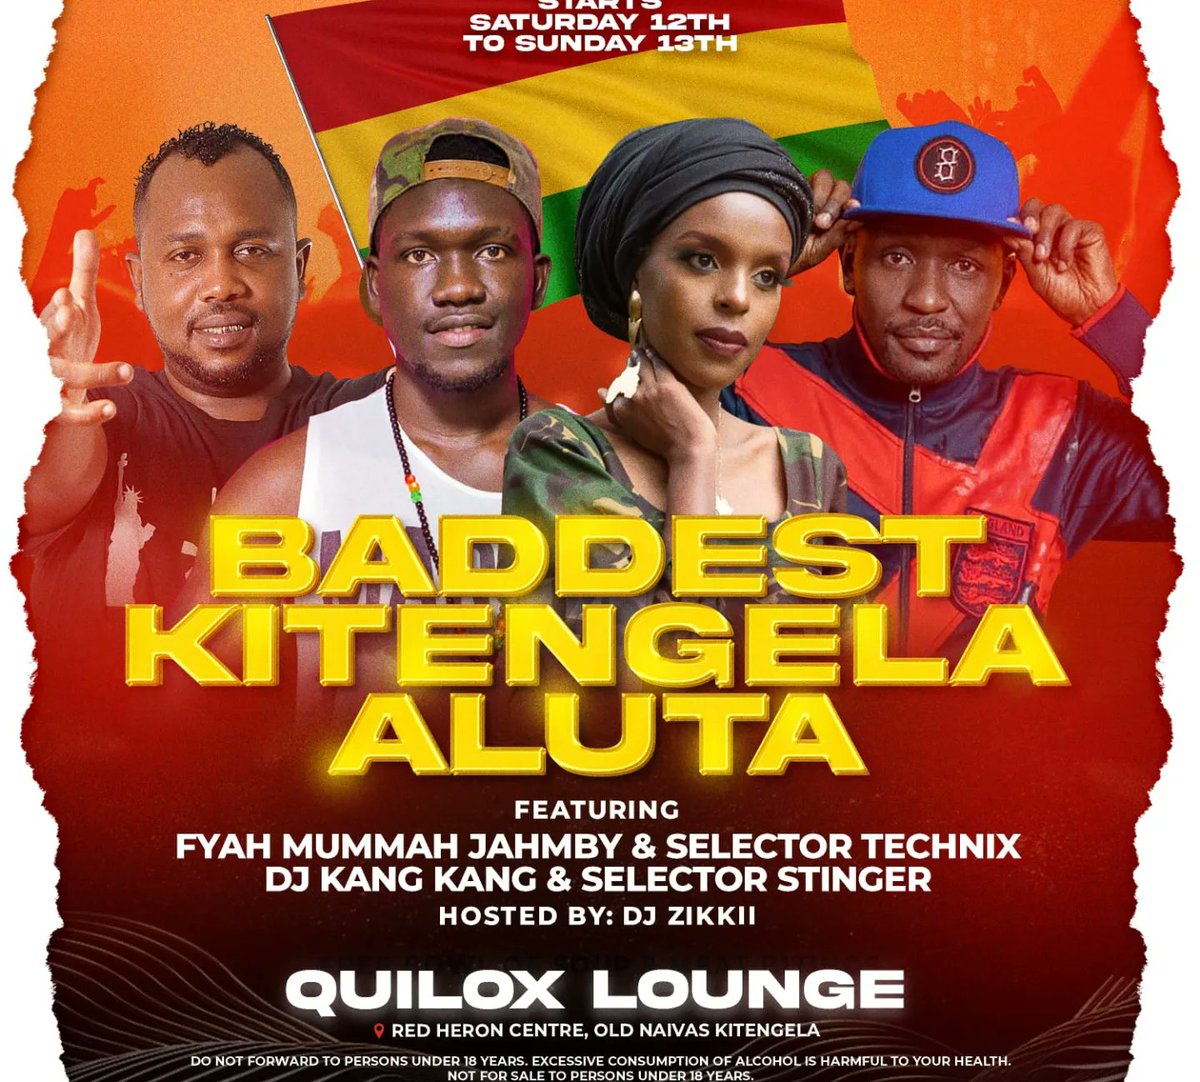 2 SOLD OUT SHOWS HERE IN QATAR. Thank you so much Qatar massive for such a huge turn out. Next stop Quiloxlounge Kitengela Aluta Sunday tomorrow from 6am - Mon morning with Aluta king @DjKangKang & my dj @Selectorstinger hosted by yours truly @Jahmbeekoikai na Kijana wa Masaku